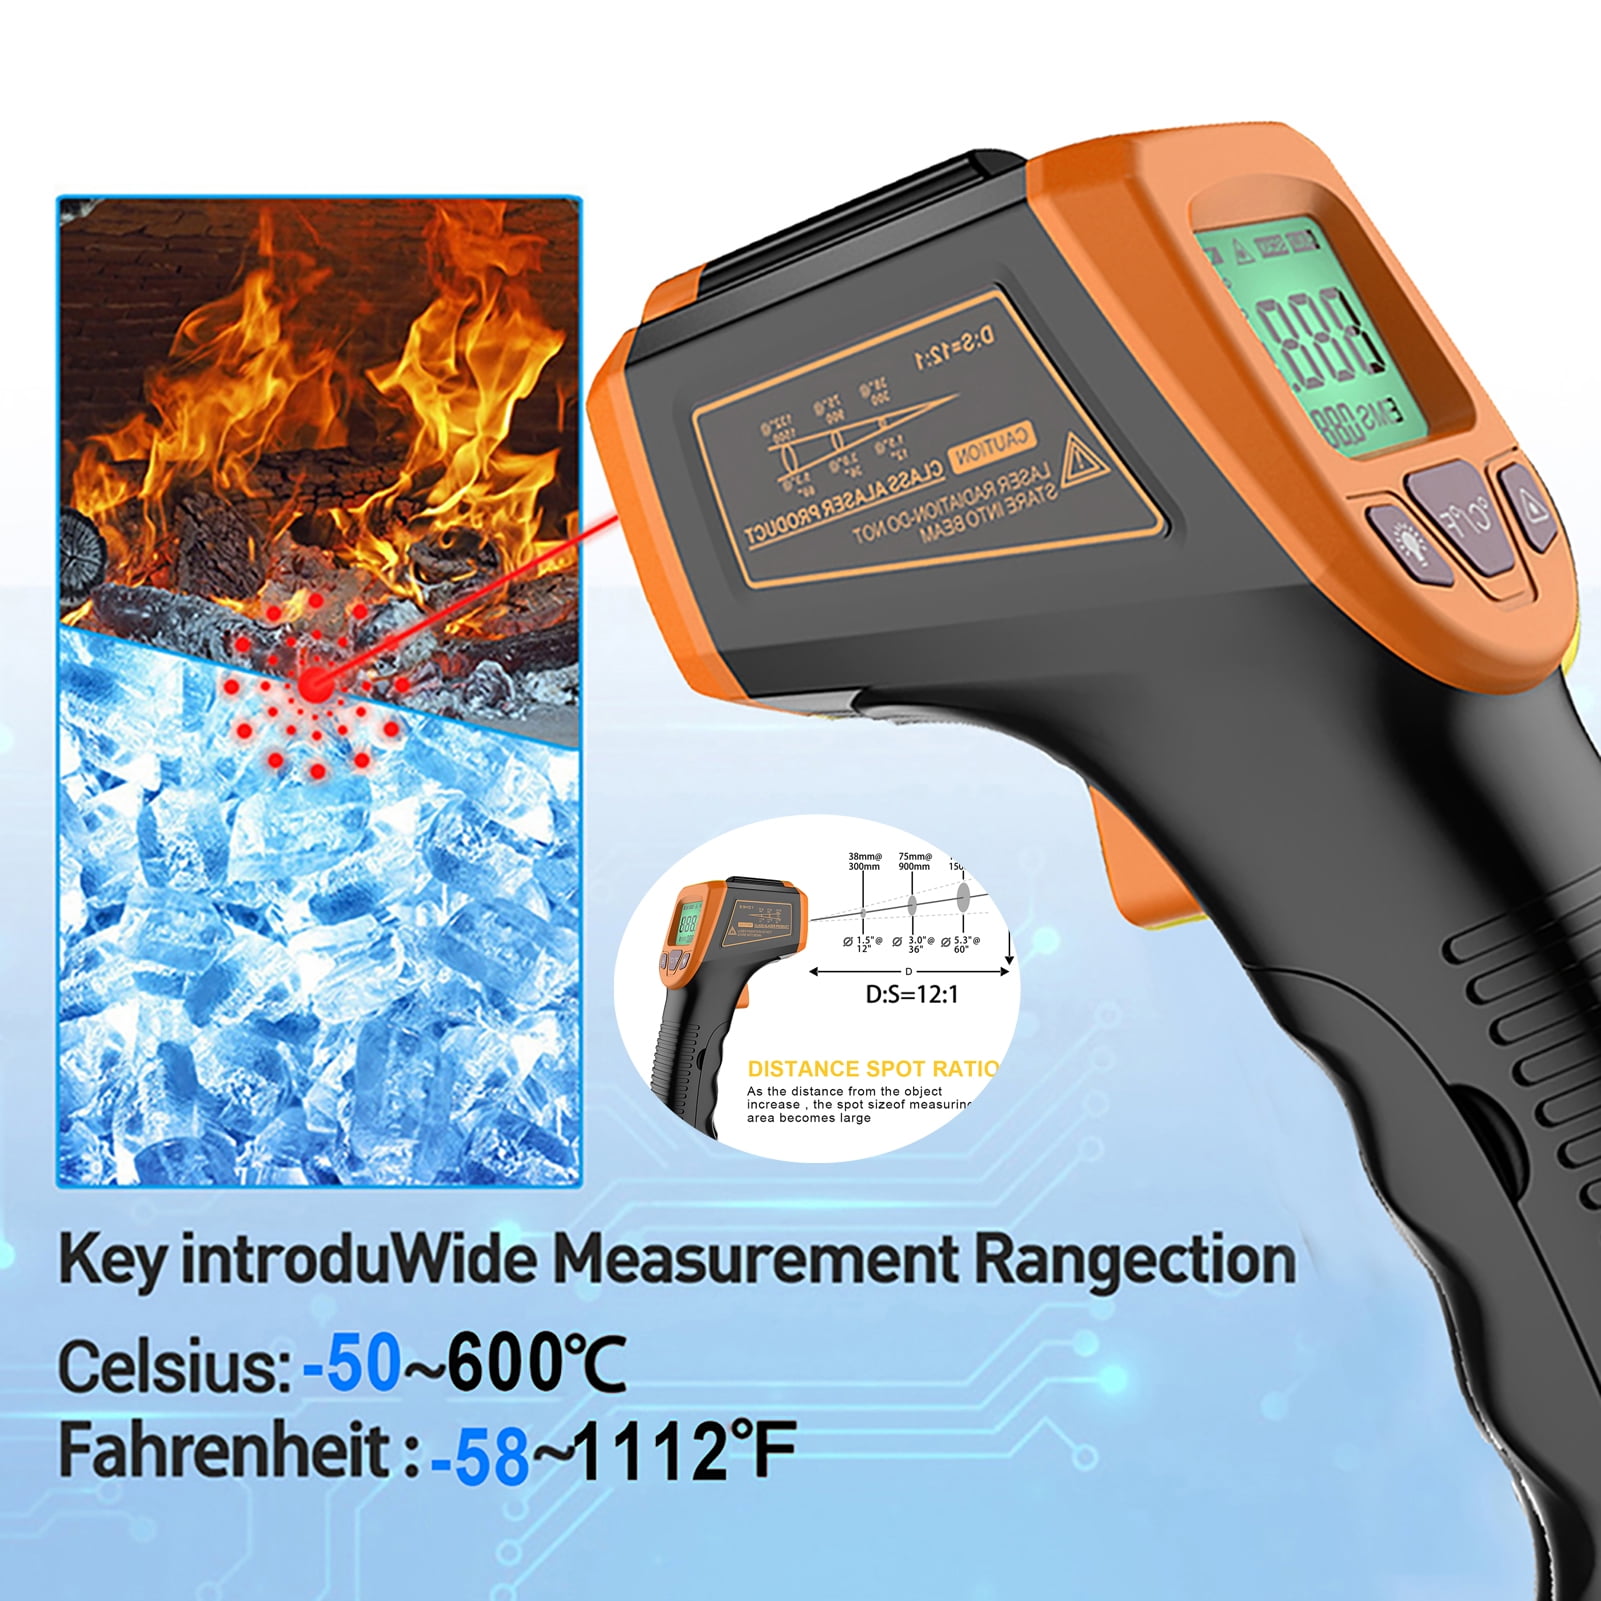 Compact Infrared Food Safety Thermometer Size 3 800115C